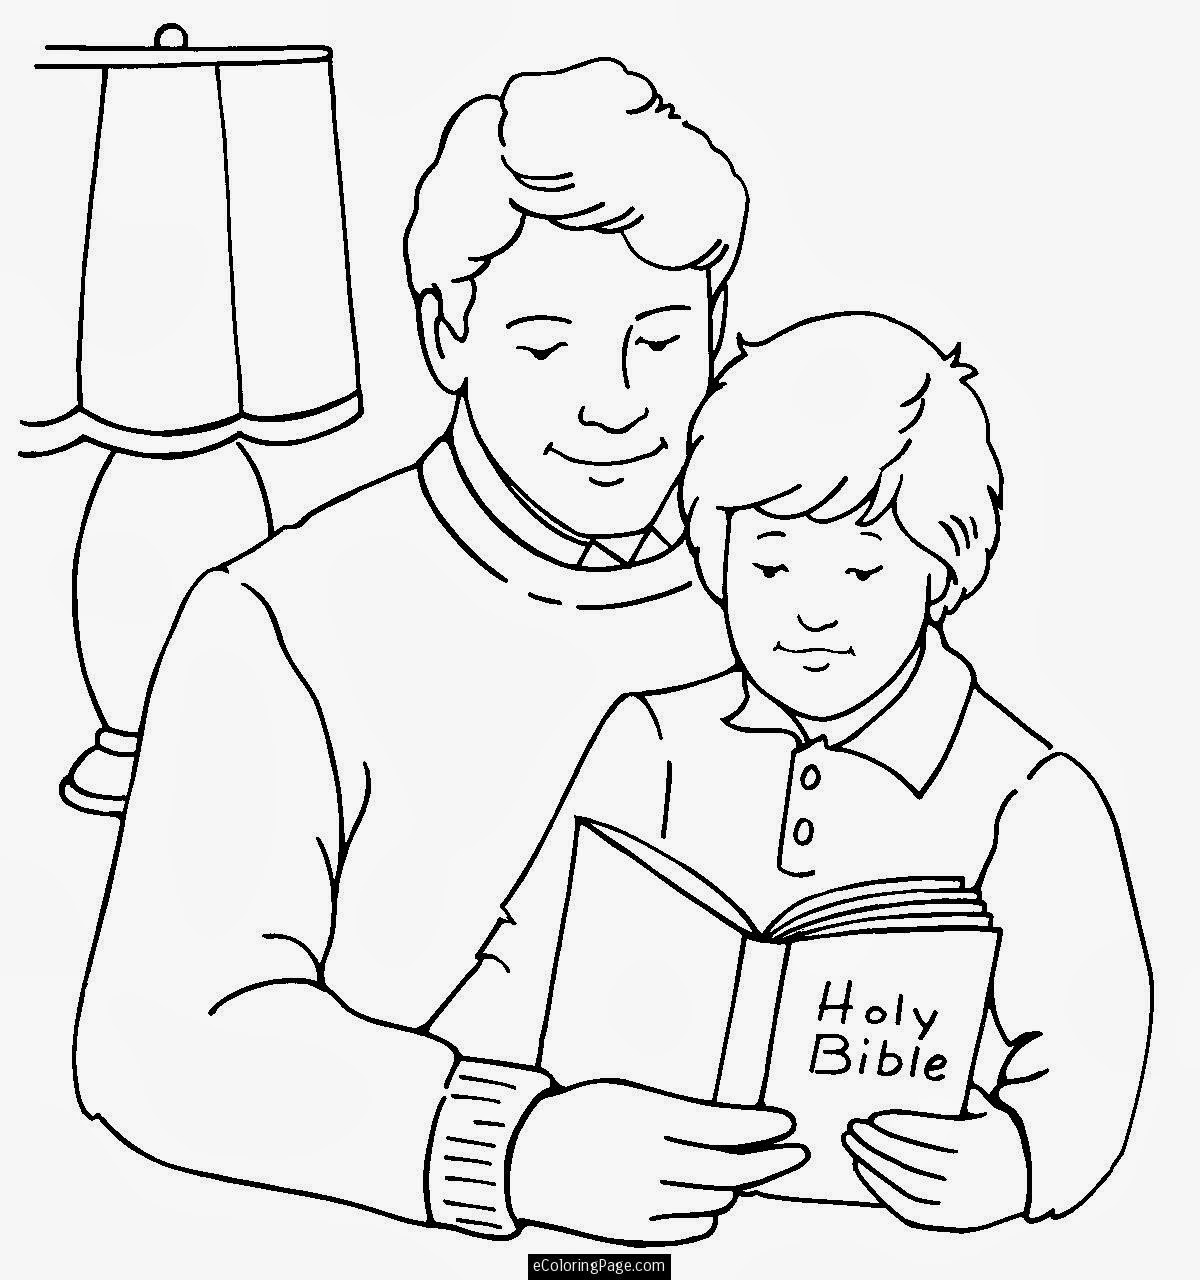 Boys Reading The Bible Coloring Pages
 Download HD Christmas & New Year 2018 Bible Verse